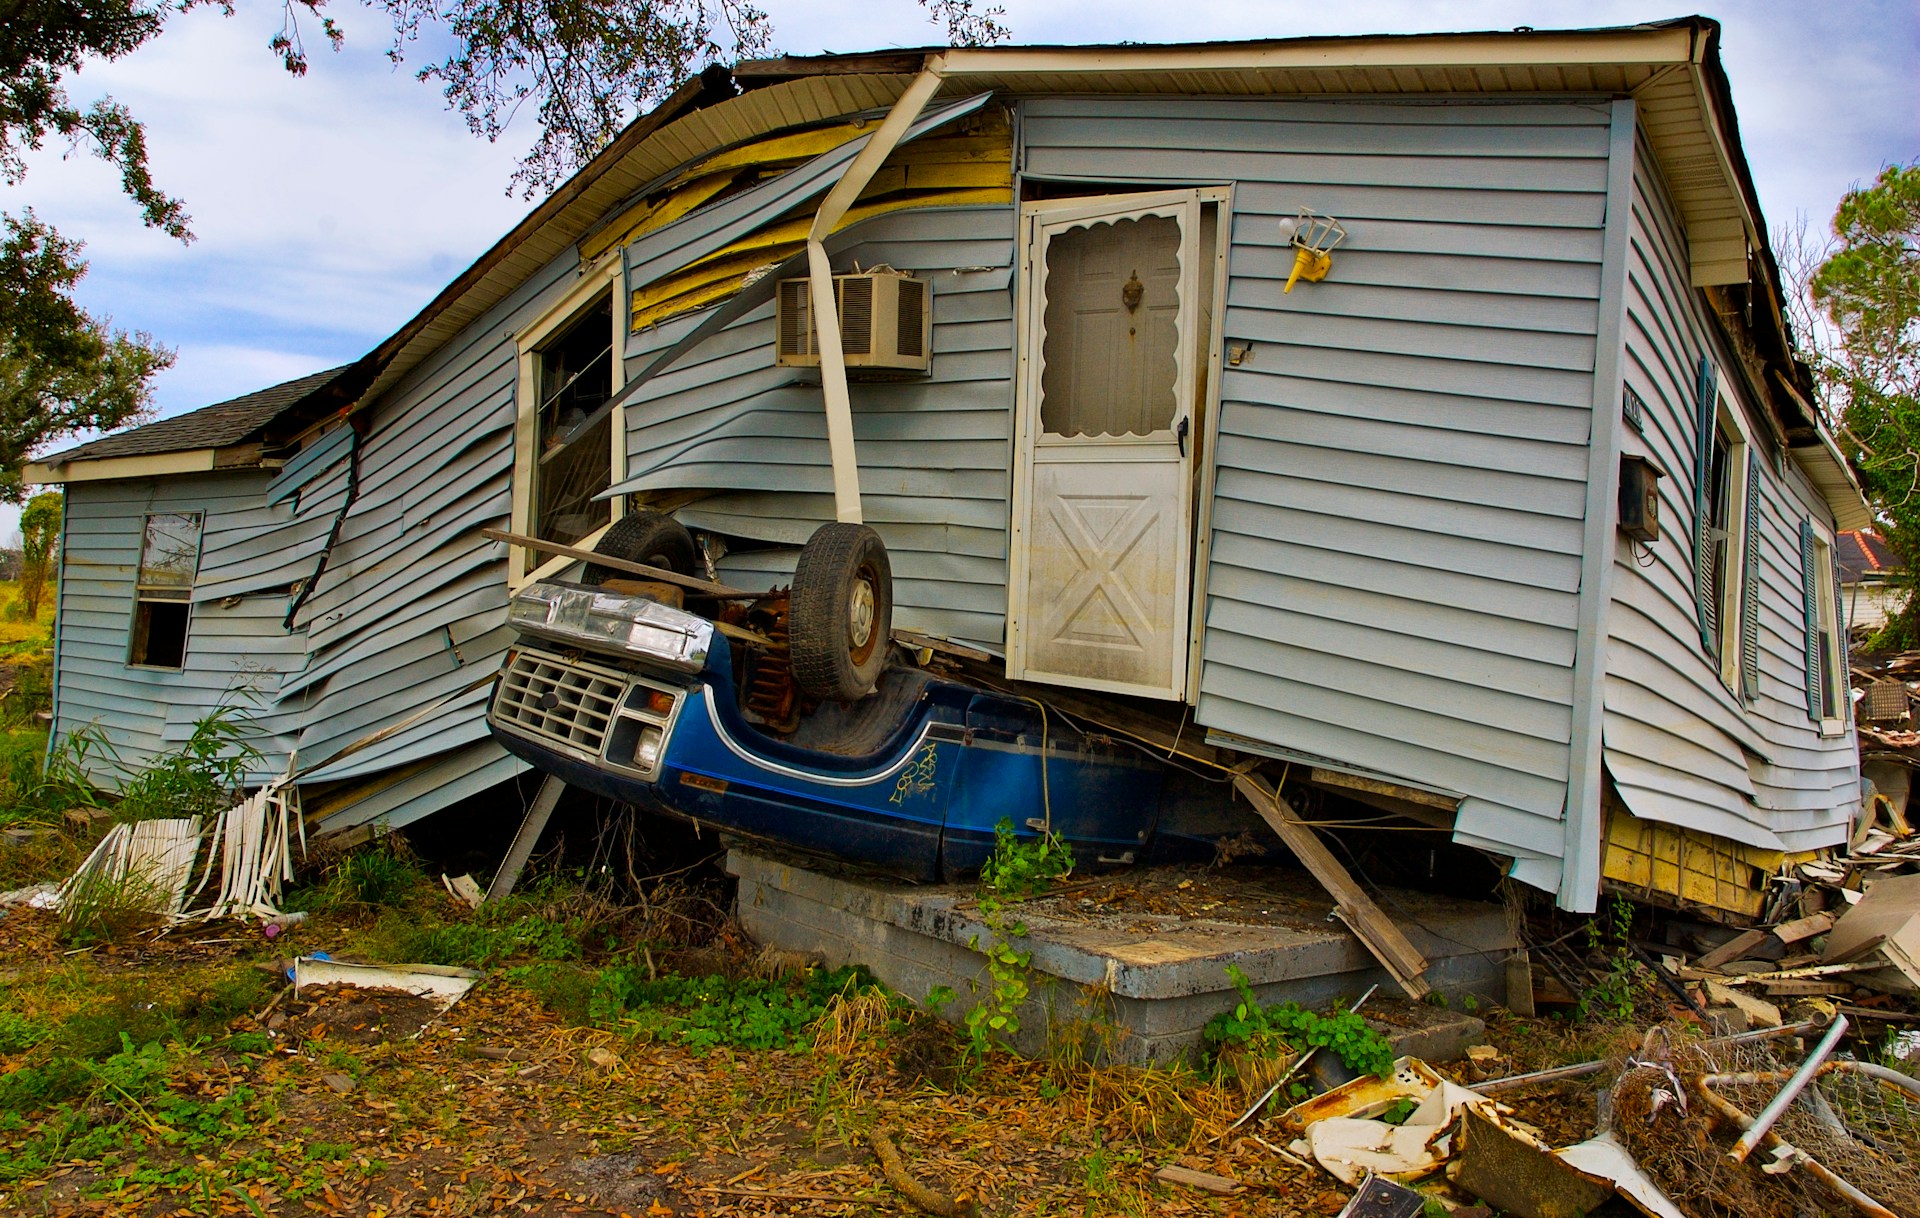 A hurricane ravaged one-floor house with an upturned pick up truck underneath it